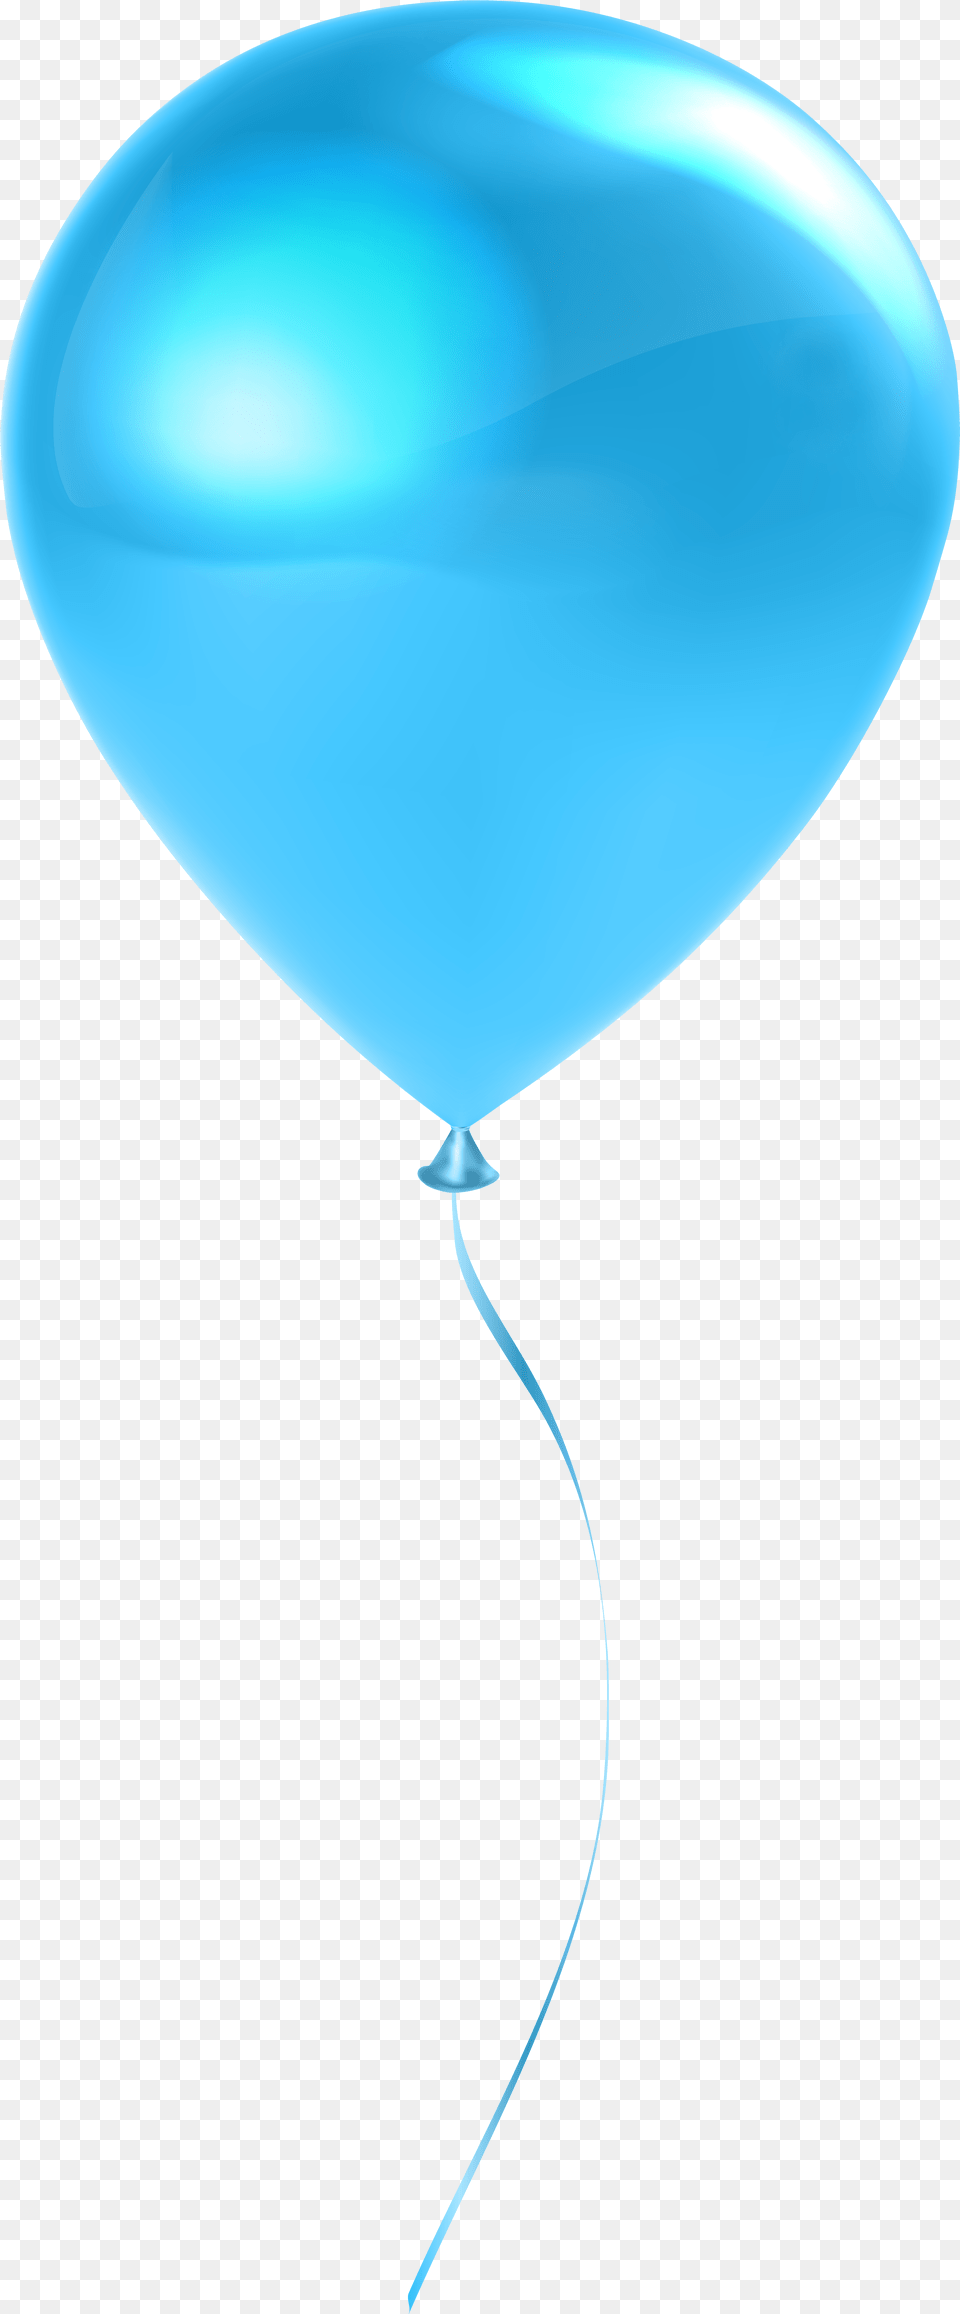 Transparent Real Balloons Transparent Blue Balloons Clipart, Balloon Png Image